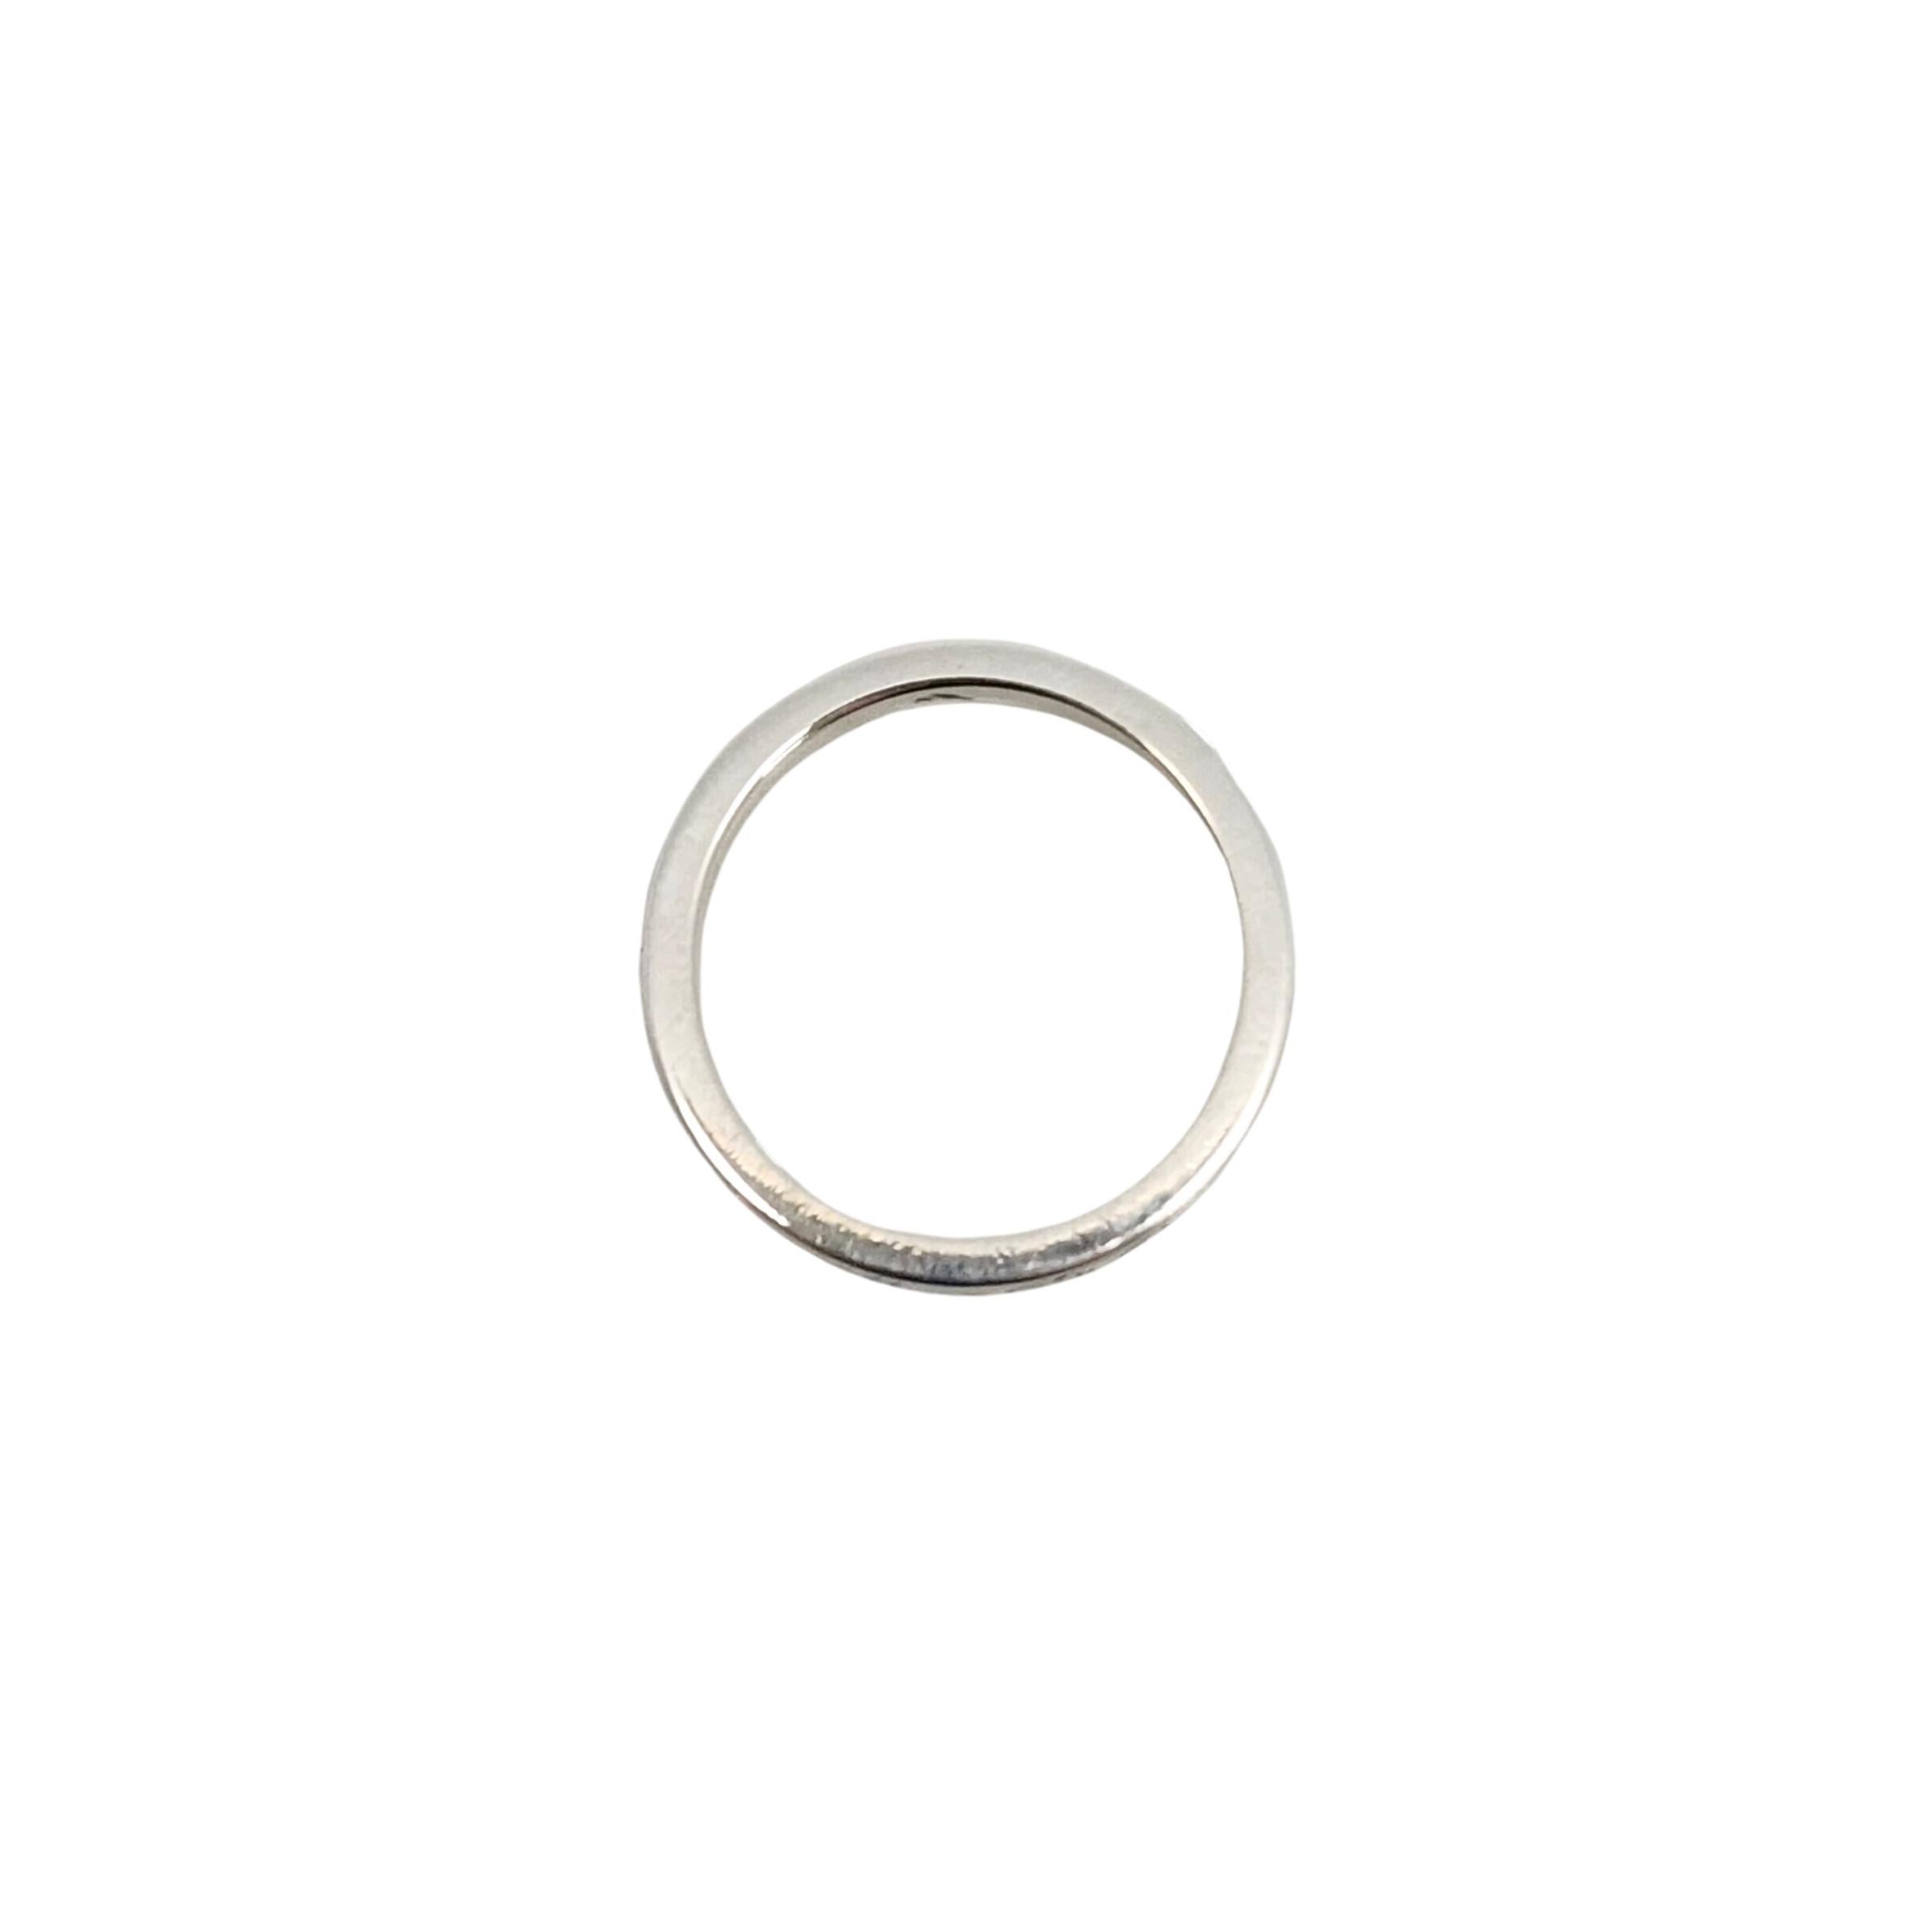 Tiffany & Co New York Address Notes Narrow Band Ring Taille 5,25 n°13007 en vente 1